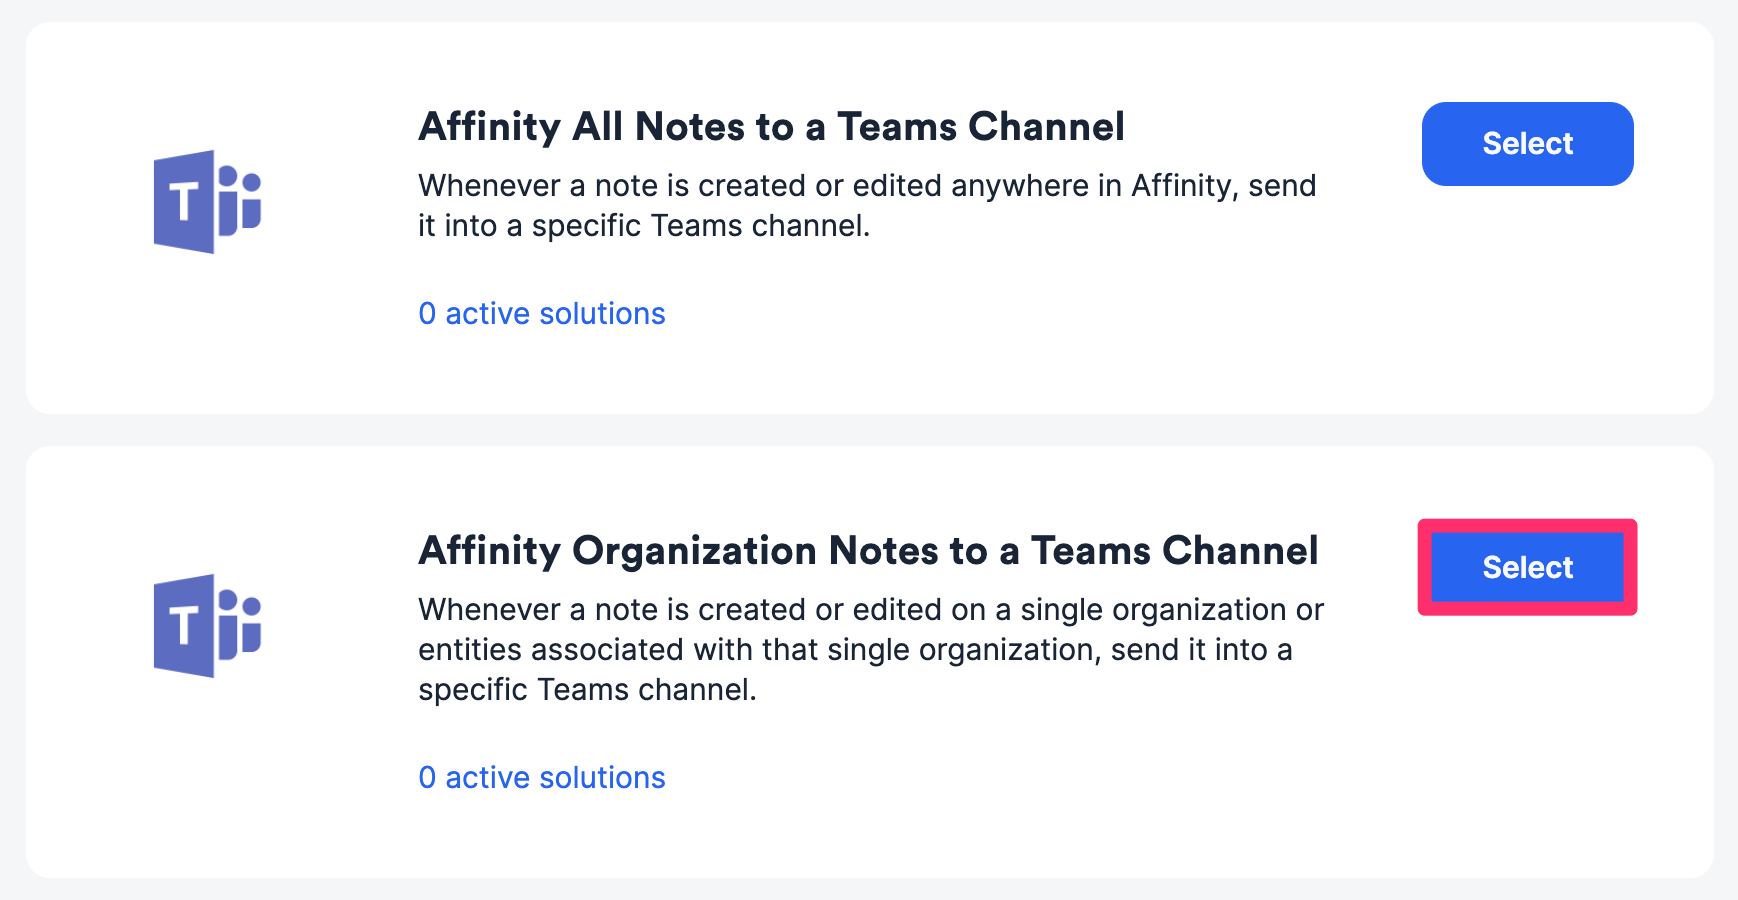 Affinity_Organization_Notes_to_a_Teams_Channel.png